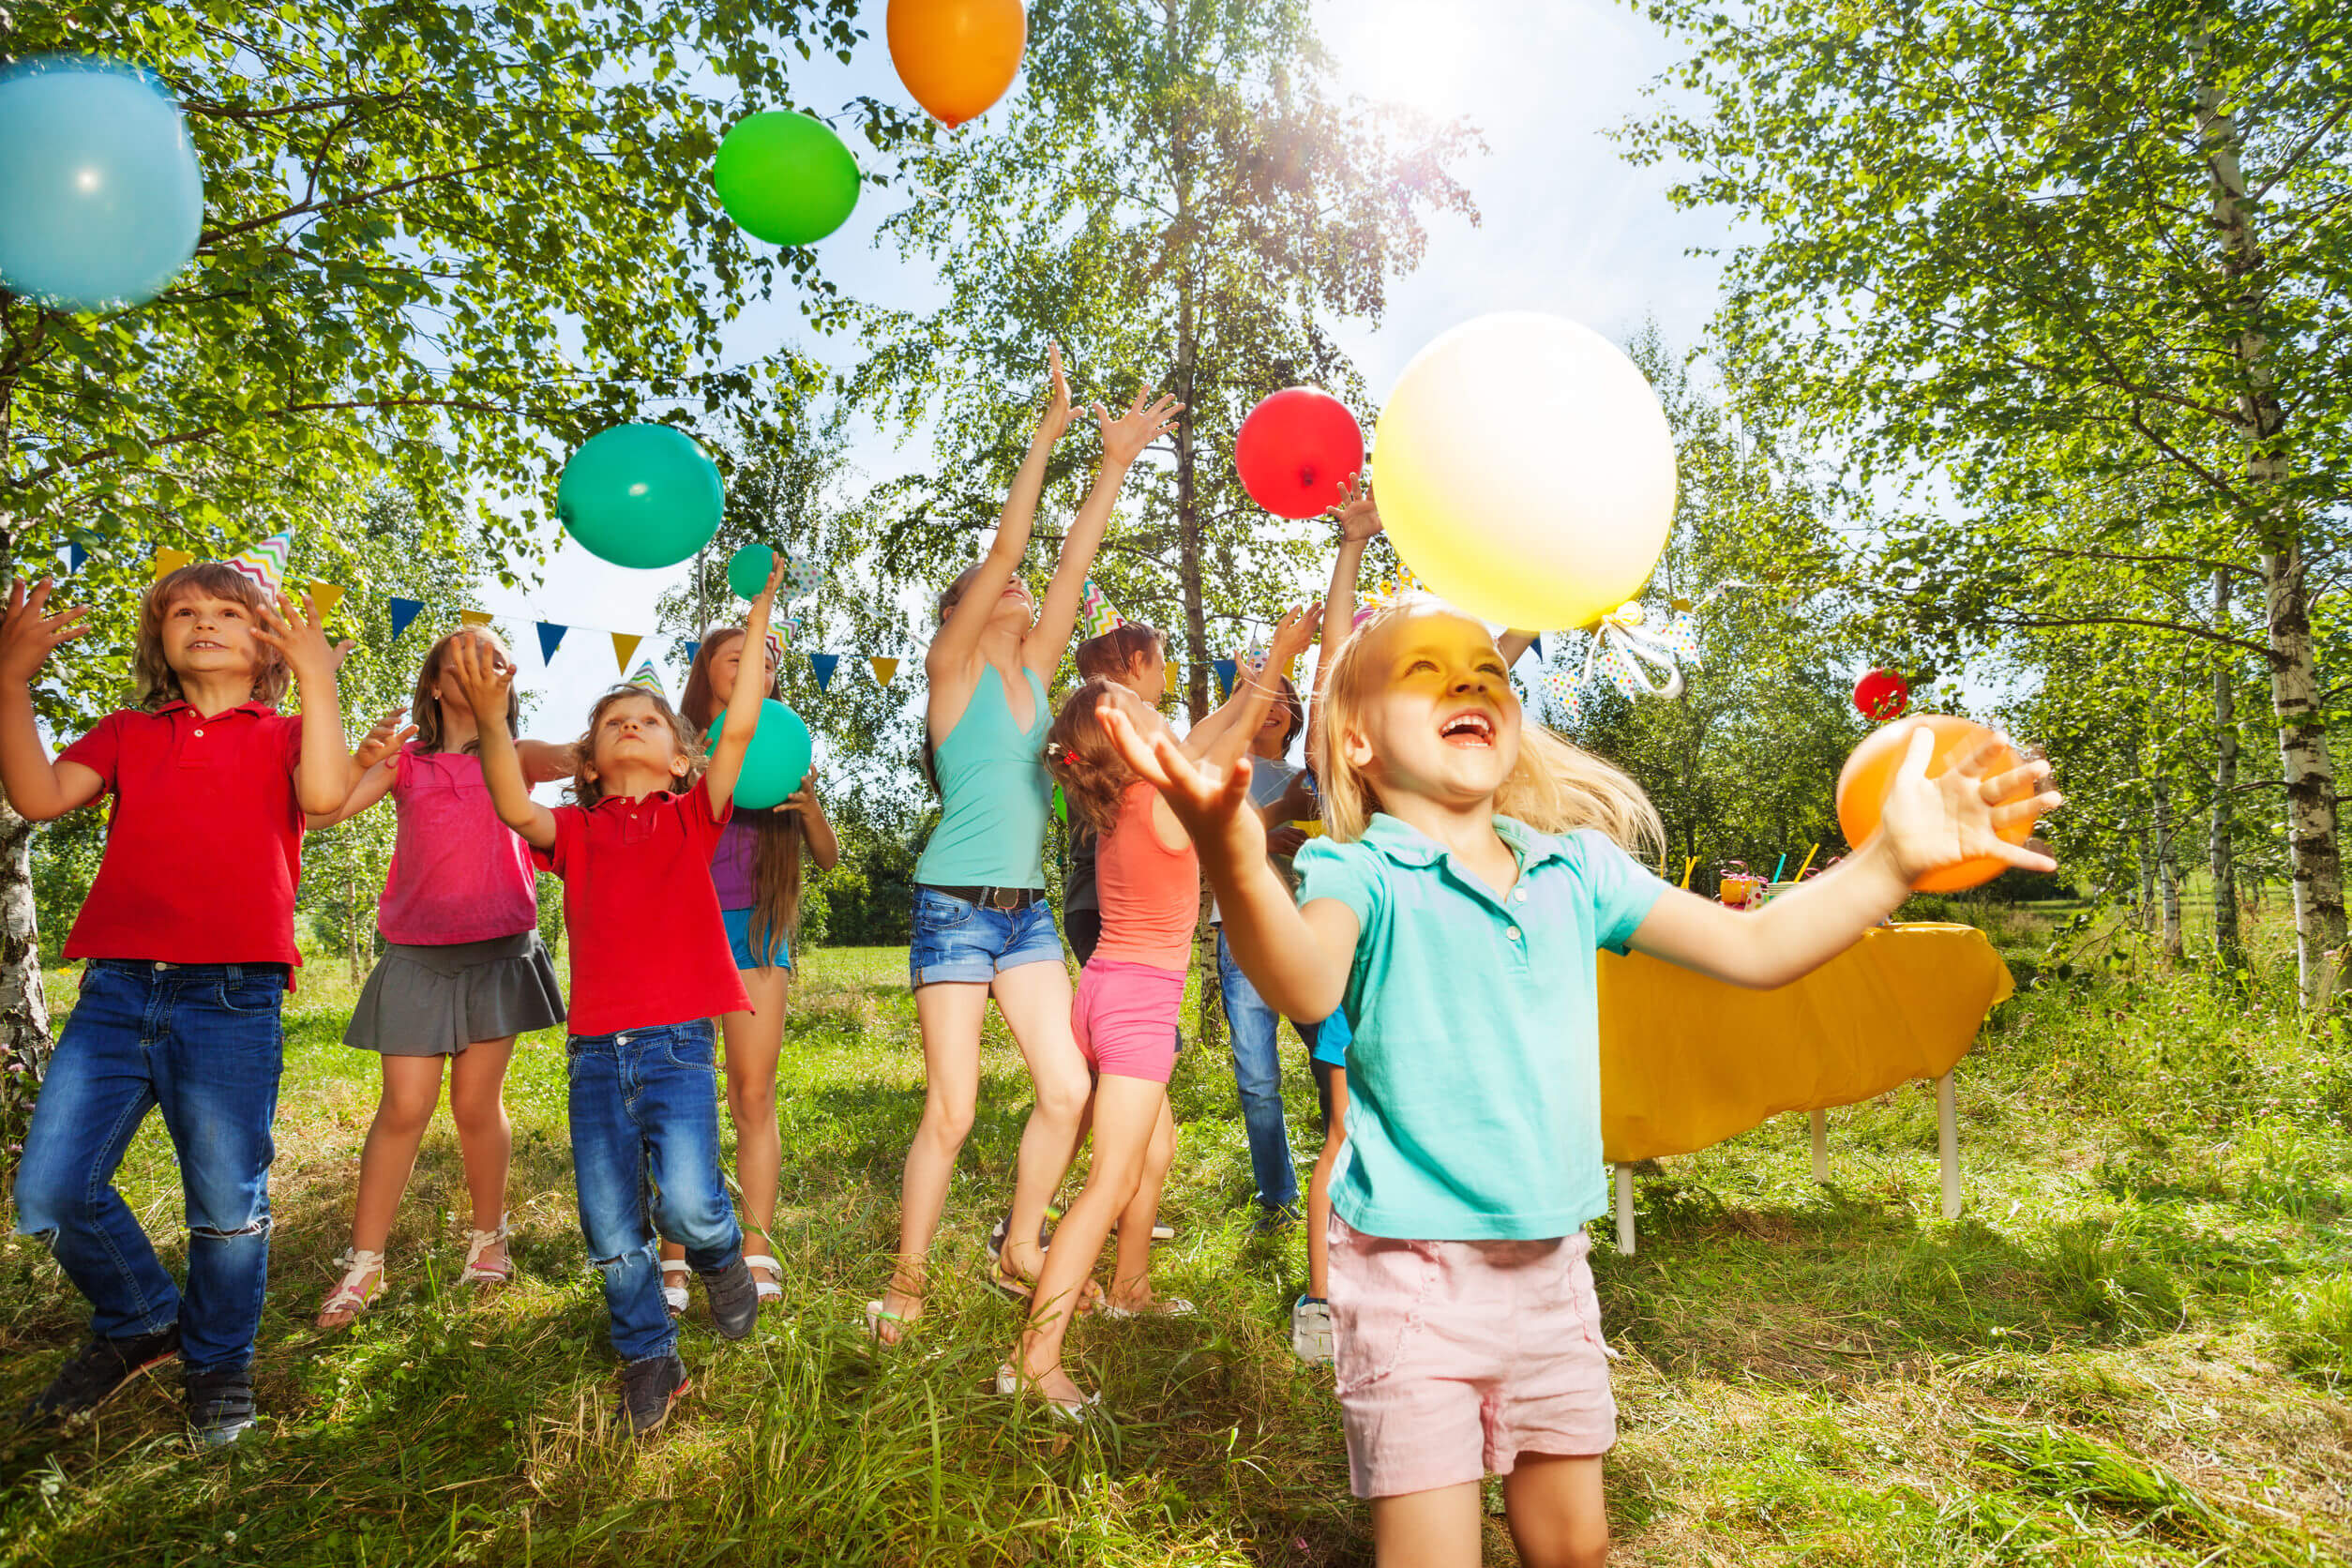 Children playing with balloons outside.